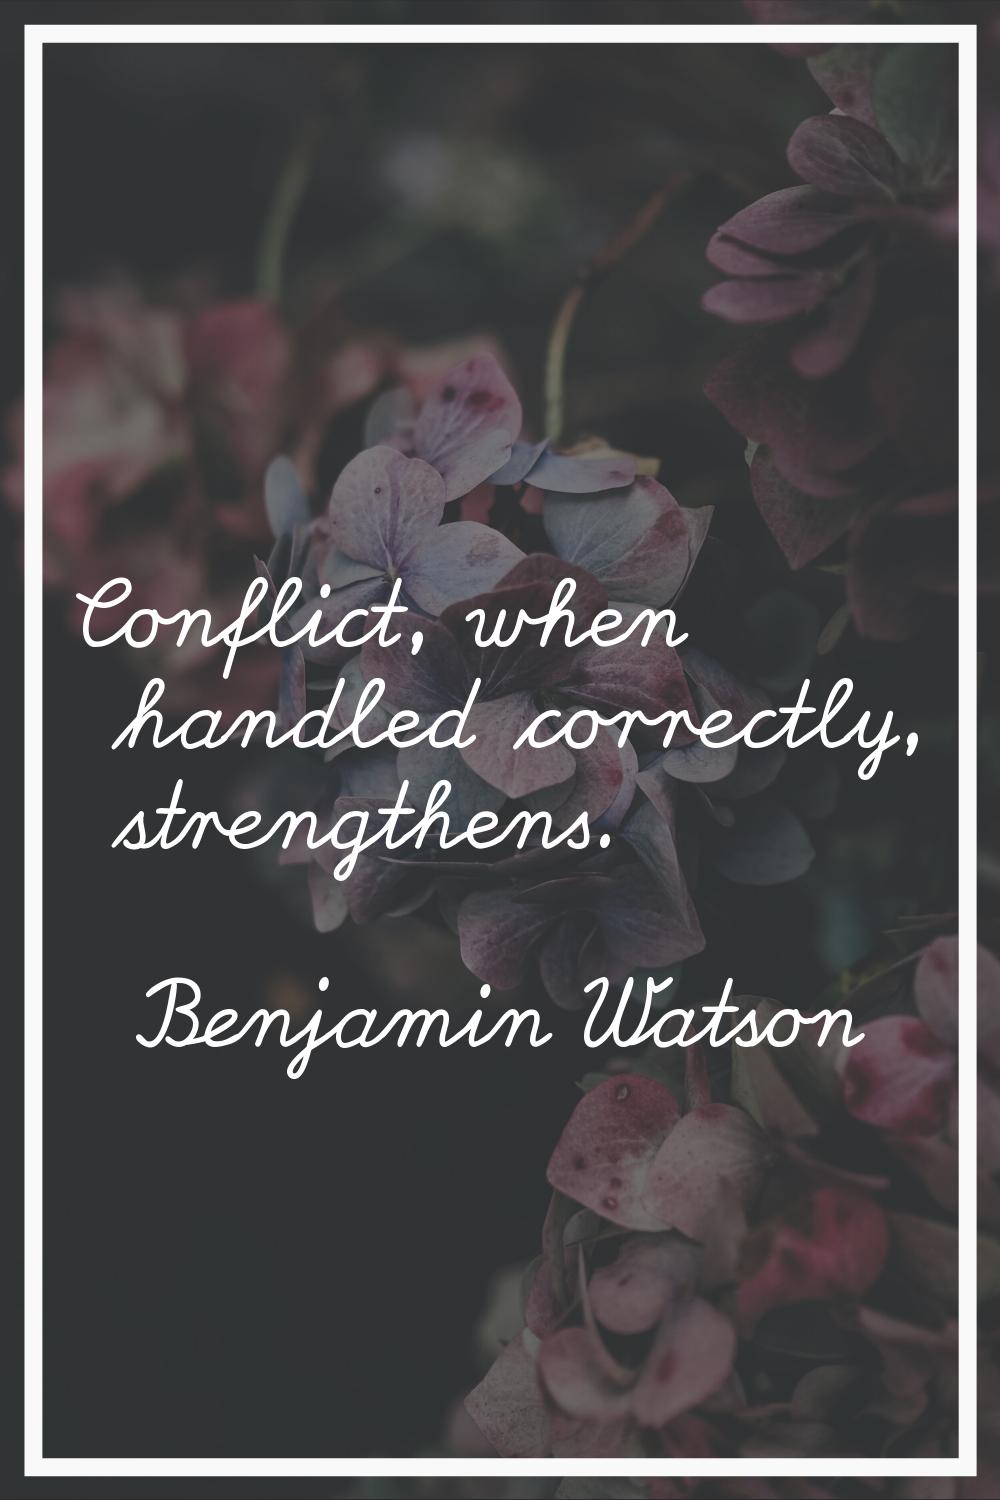 Conflict, when handled correctly, strengthens.